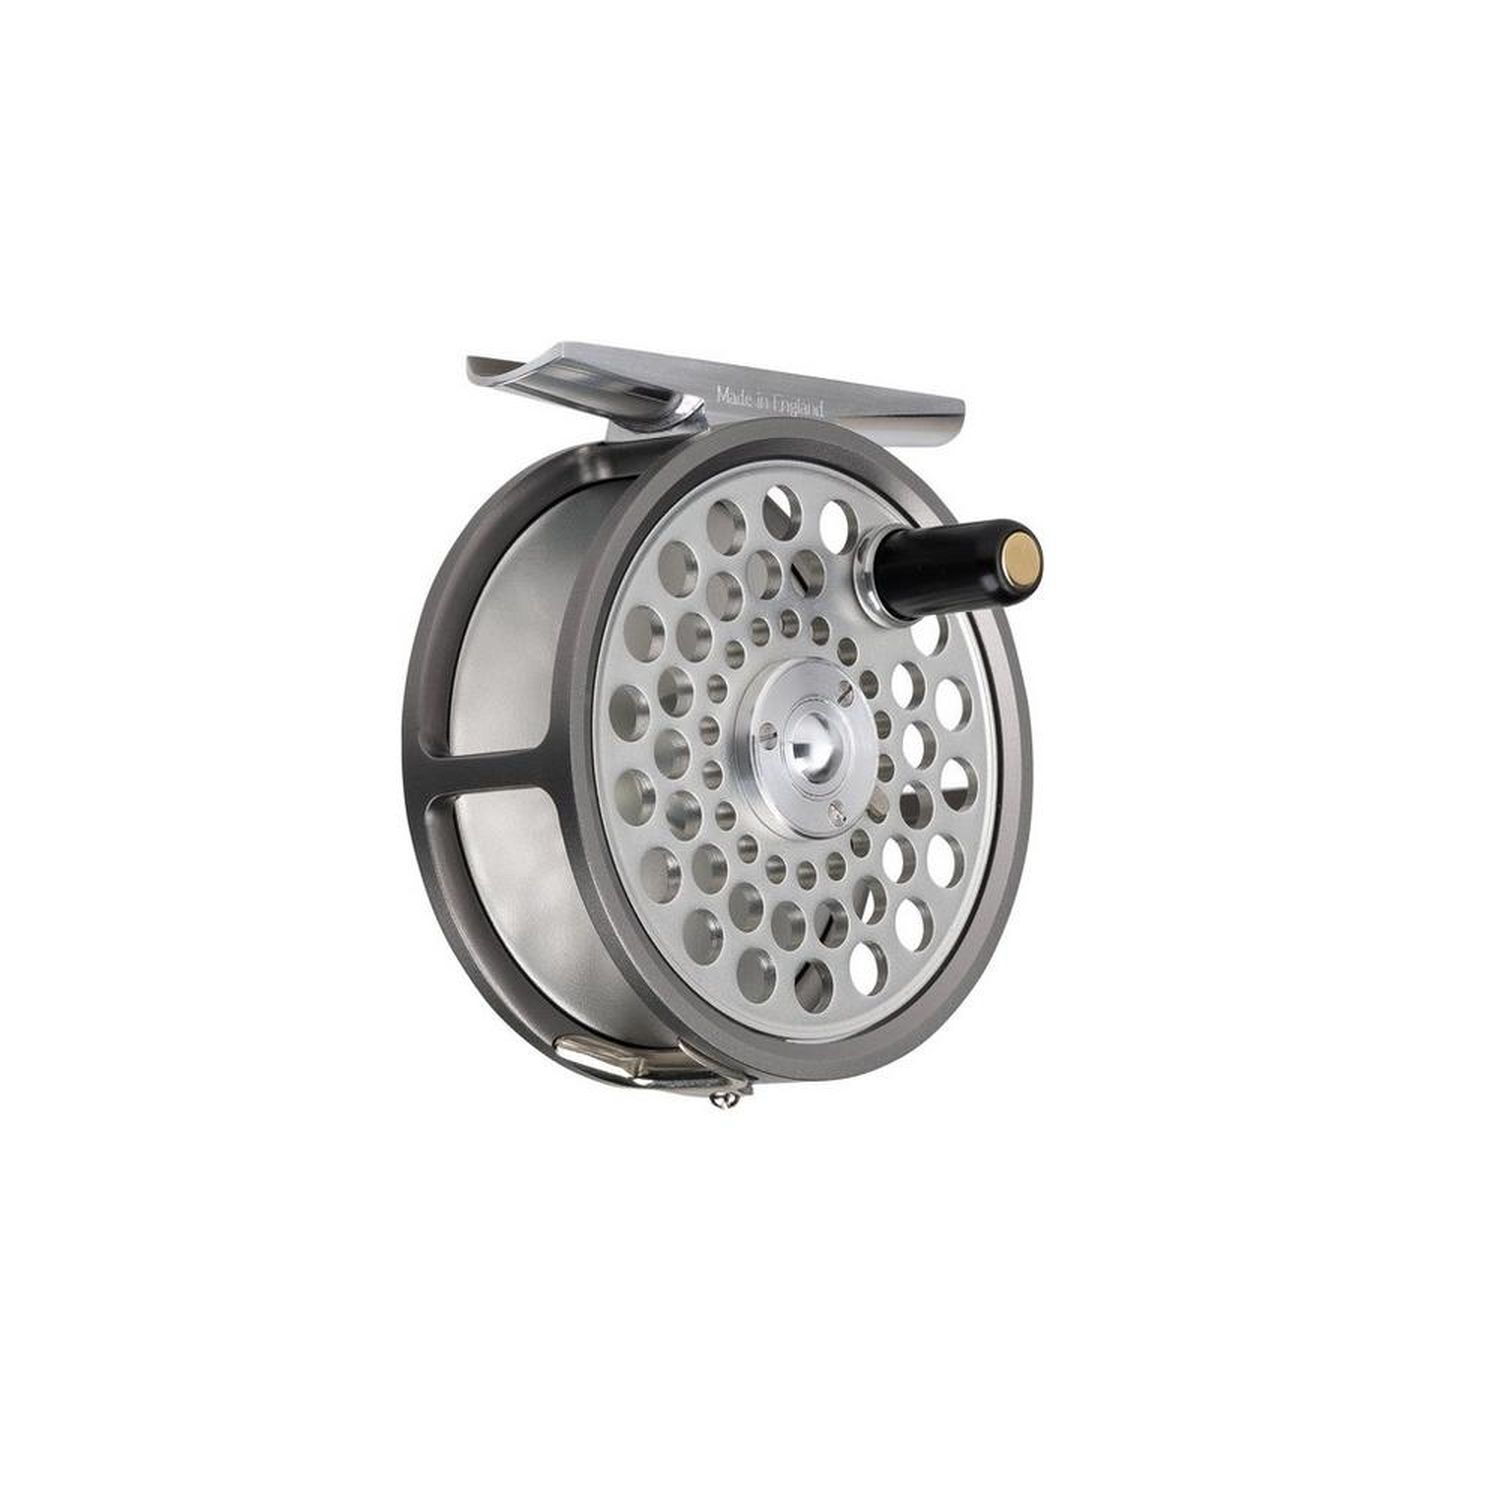 Hardy Cascapedia 1.0:1 Fly Fishing Reel for sale online